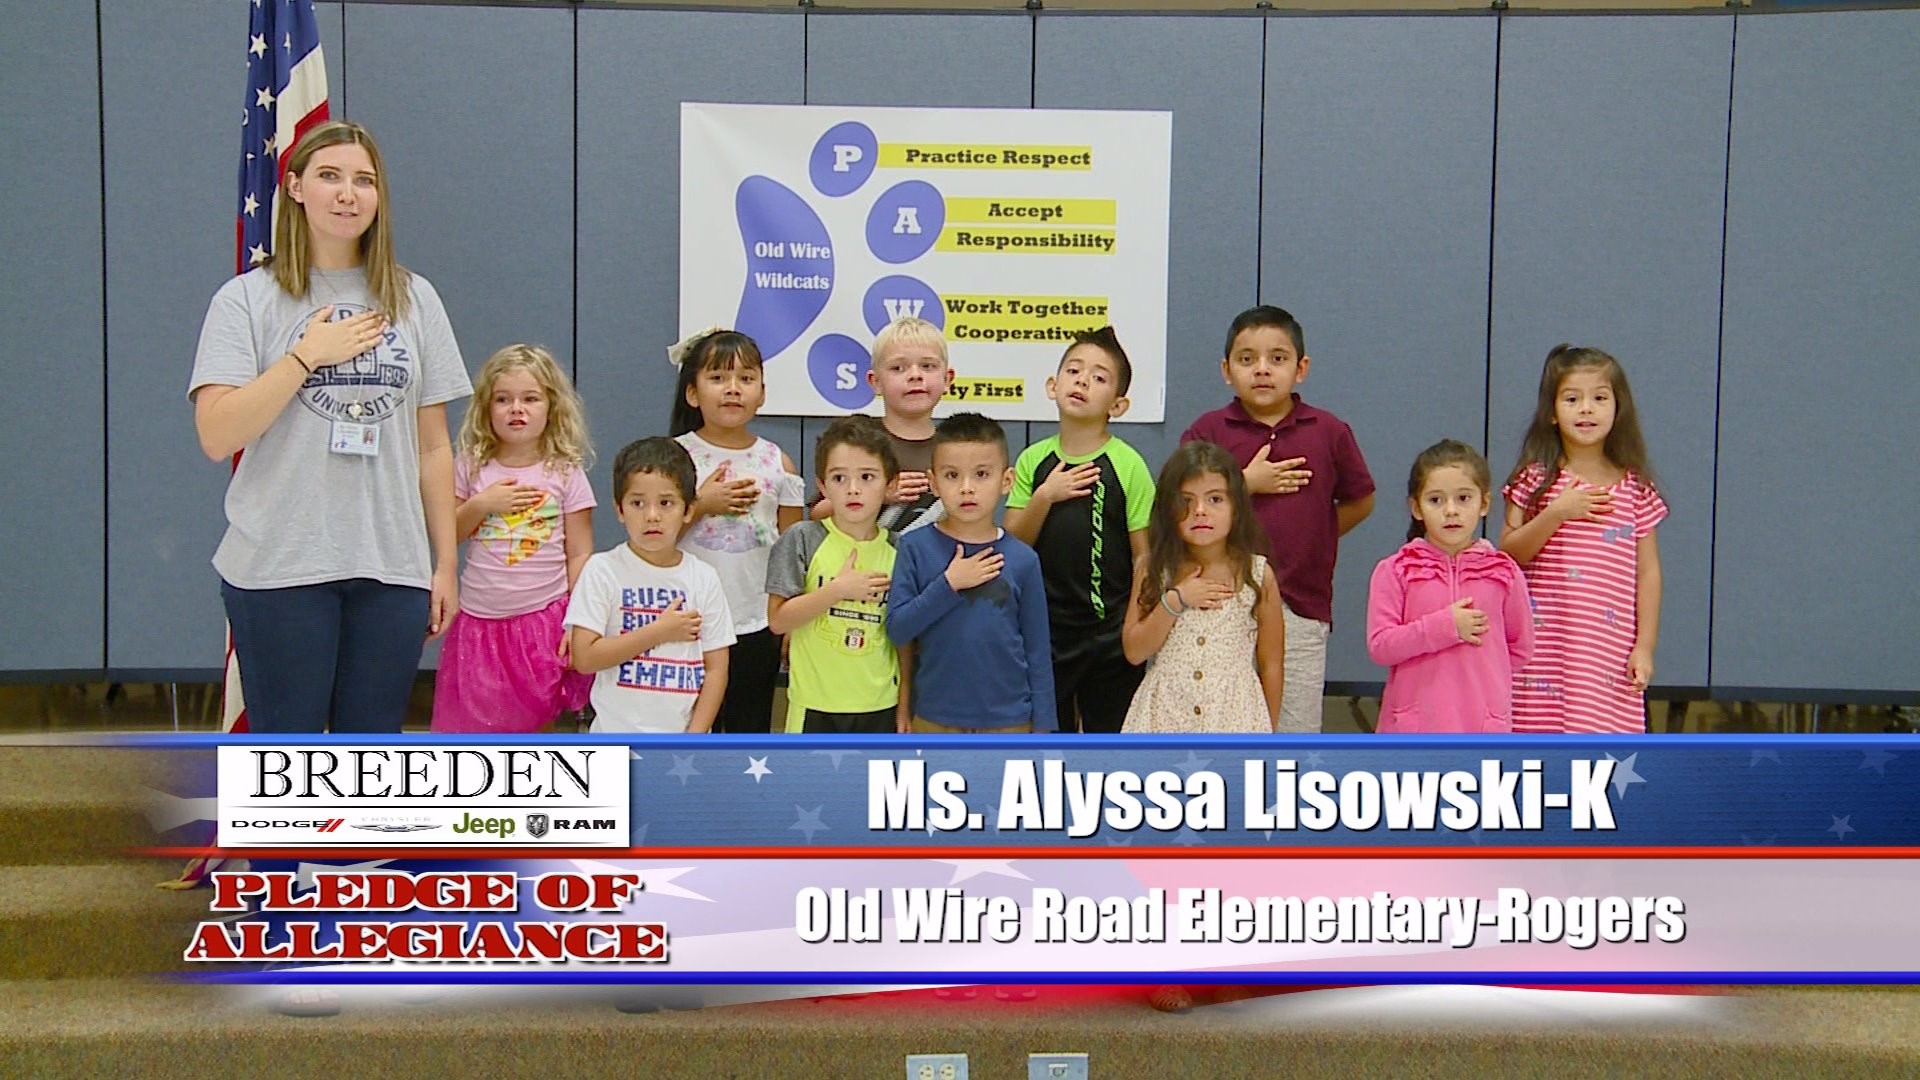 Ms. Alyssa Lisowski  K at Old Wire Road Elementary, Rogers